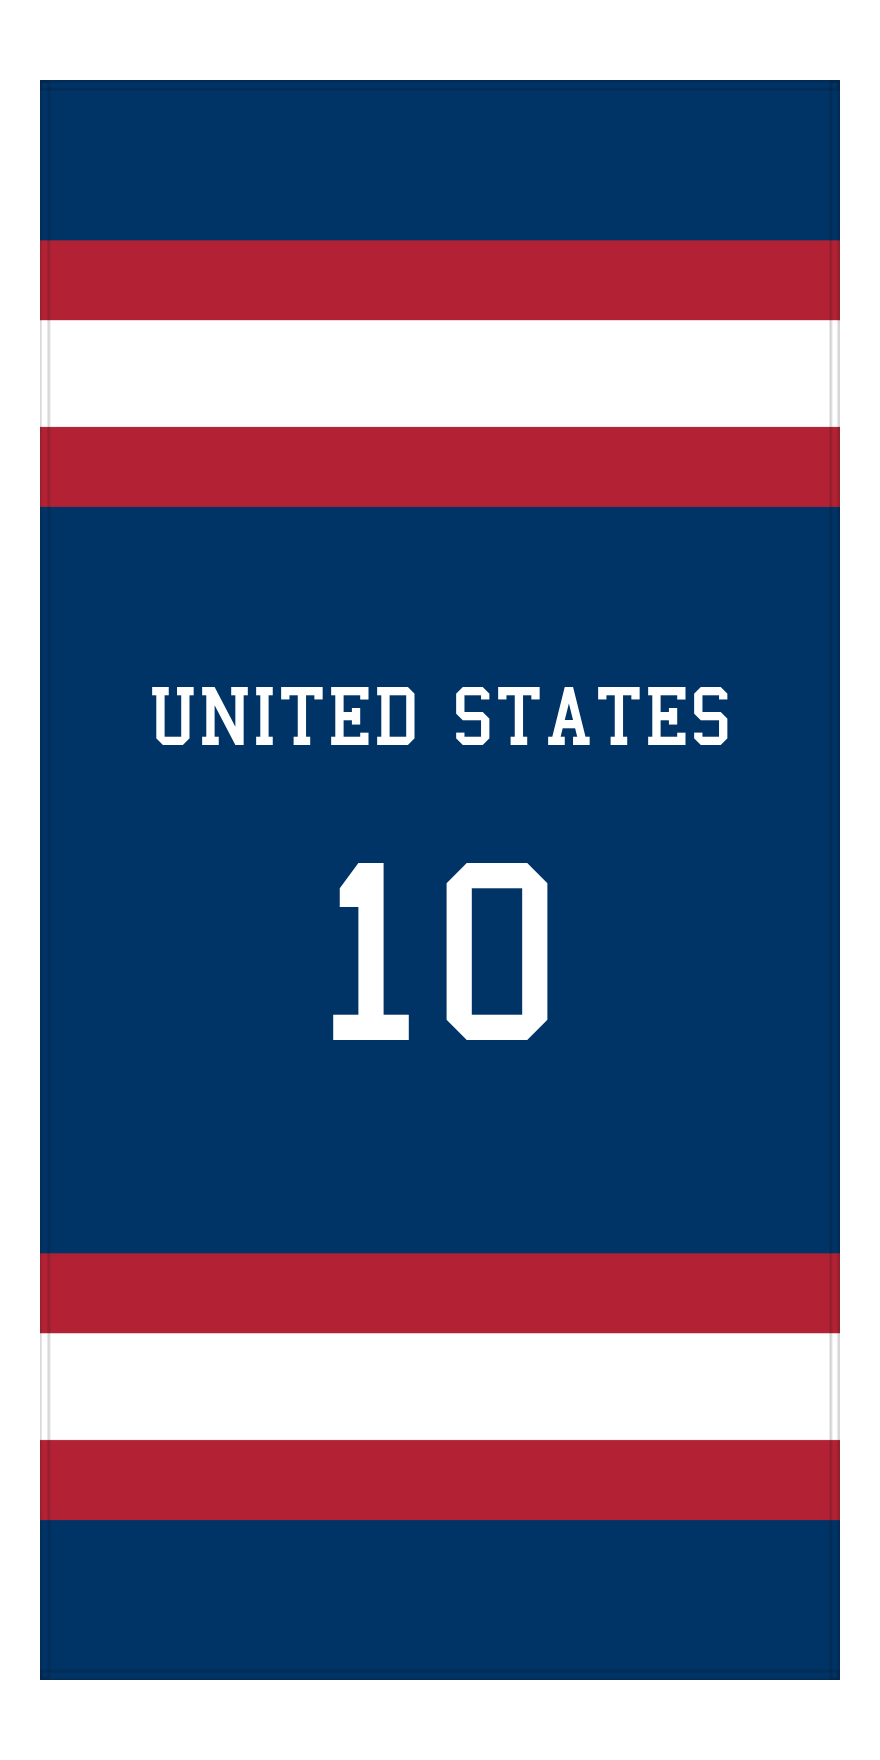 Personalized Jersey Number 1-on-1 Stripes Sports Beach Towel - United States - Vertical Design - Front View